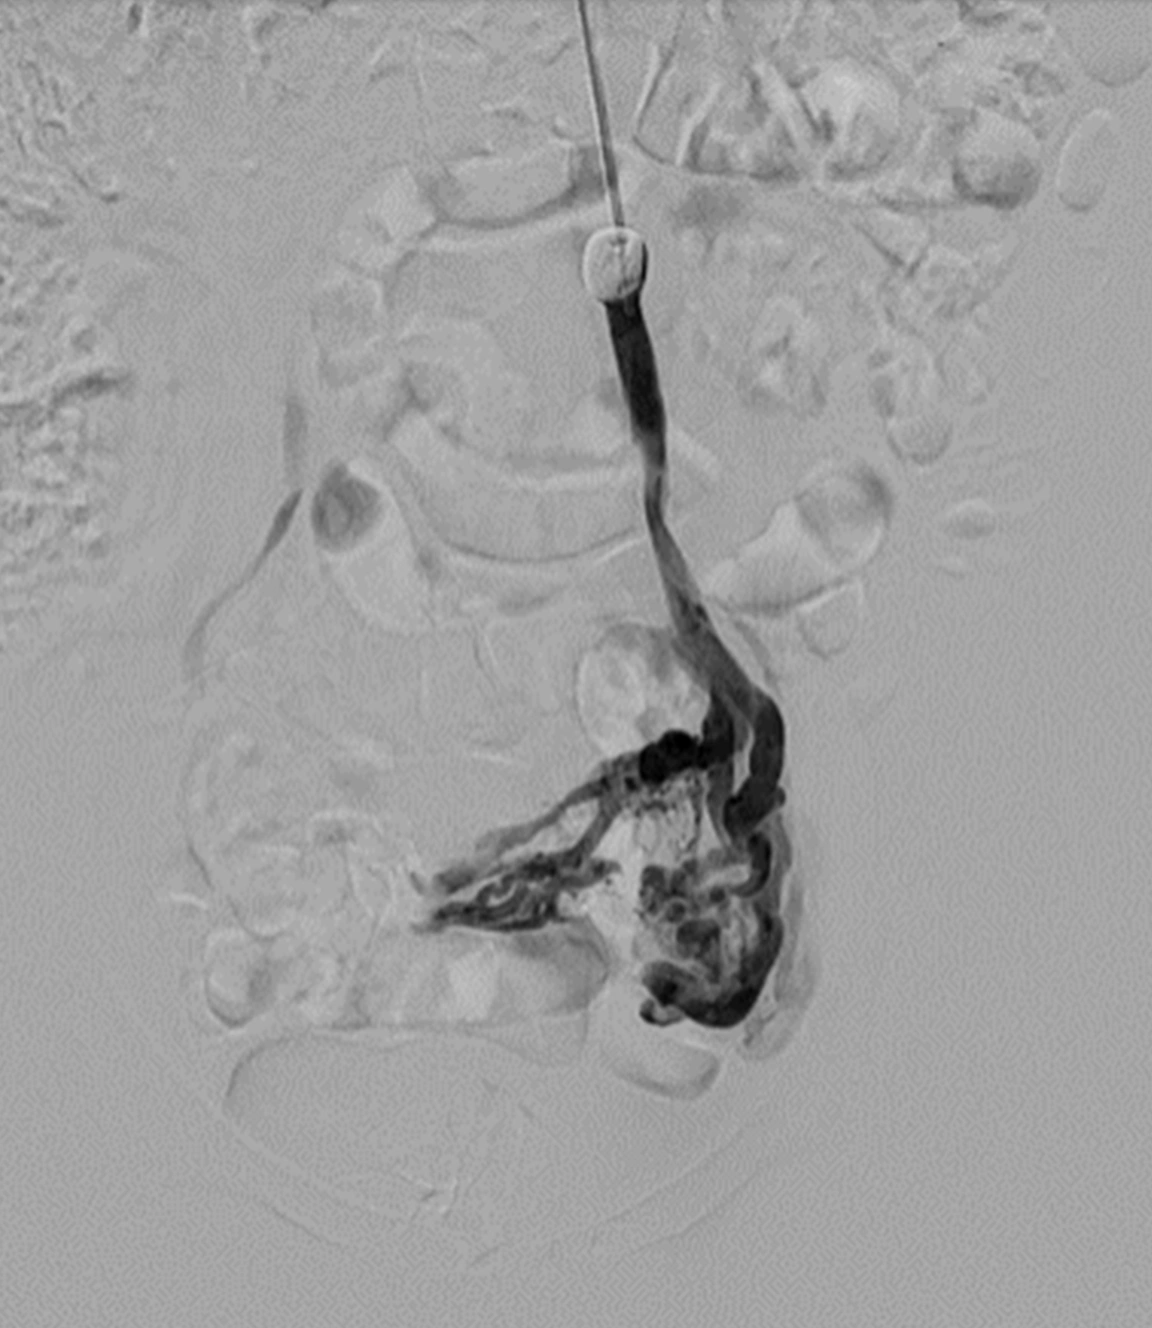 Angiogram showing pelvic congestion syndrom prior to embolization